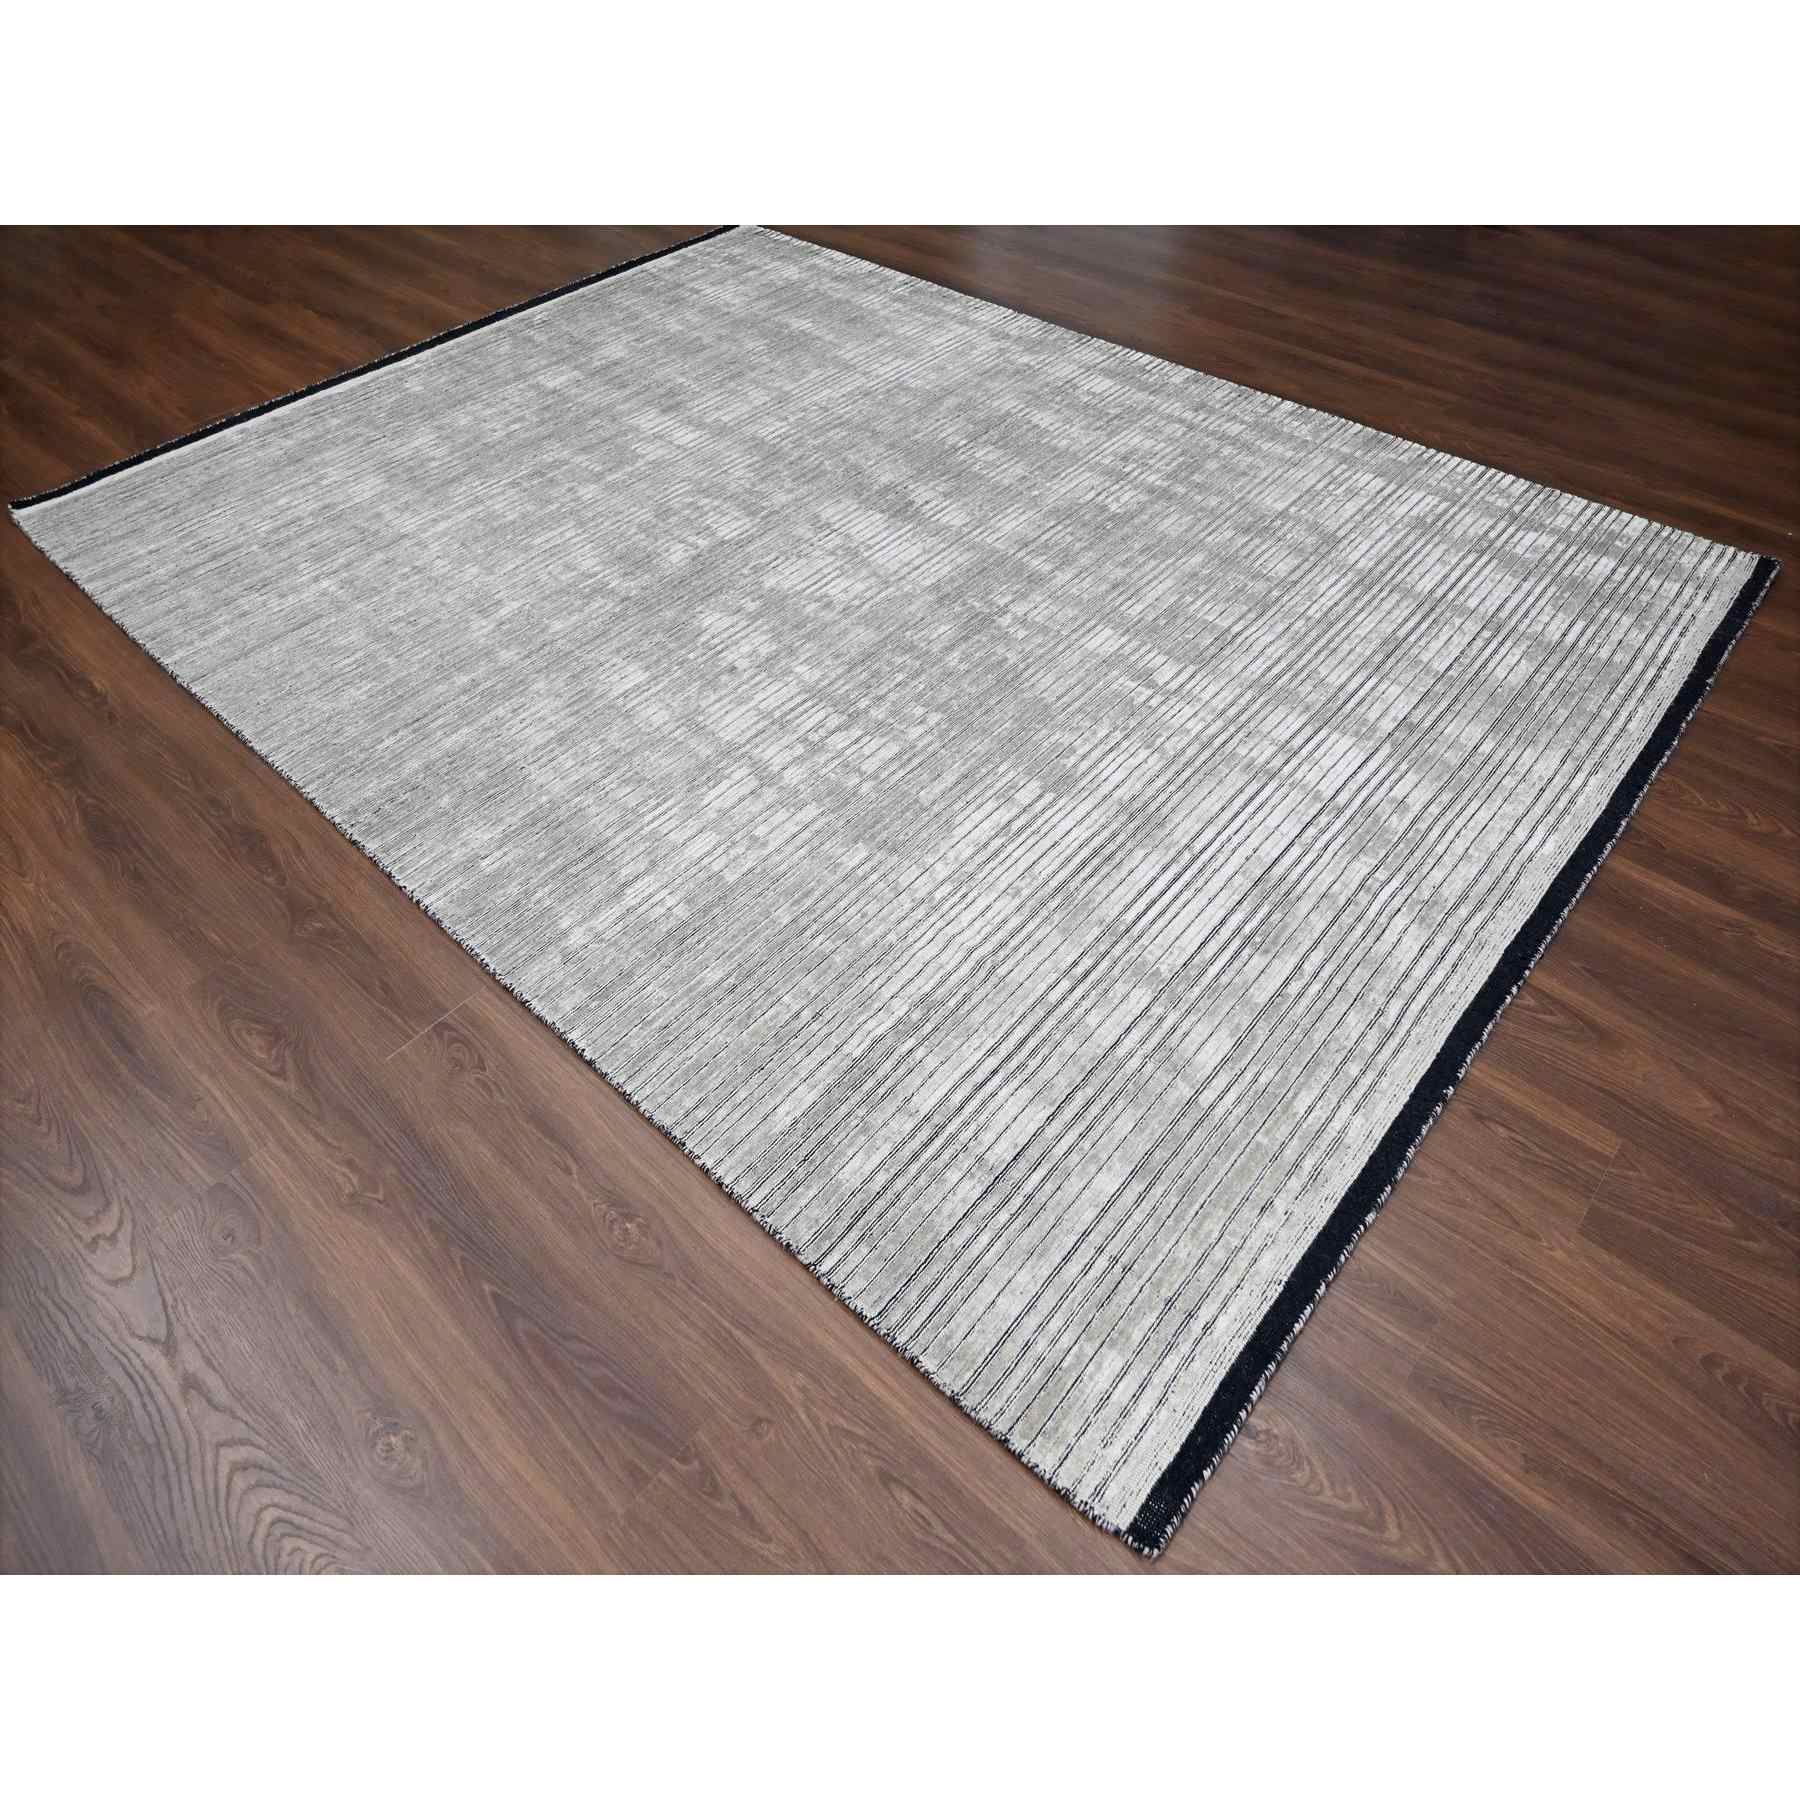 Modern-and-Contemporary-Hand-Loomed-Rug-421735